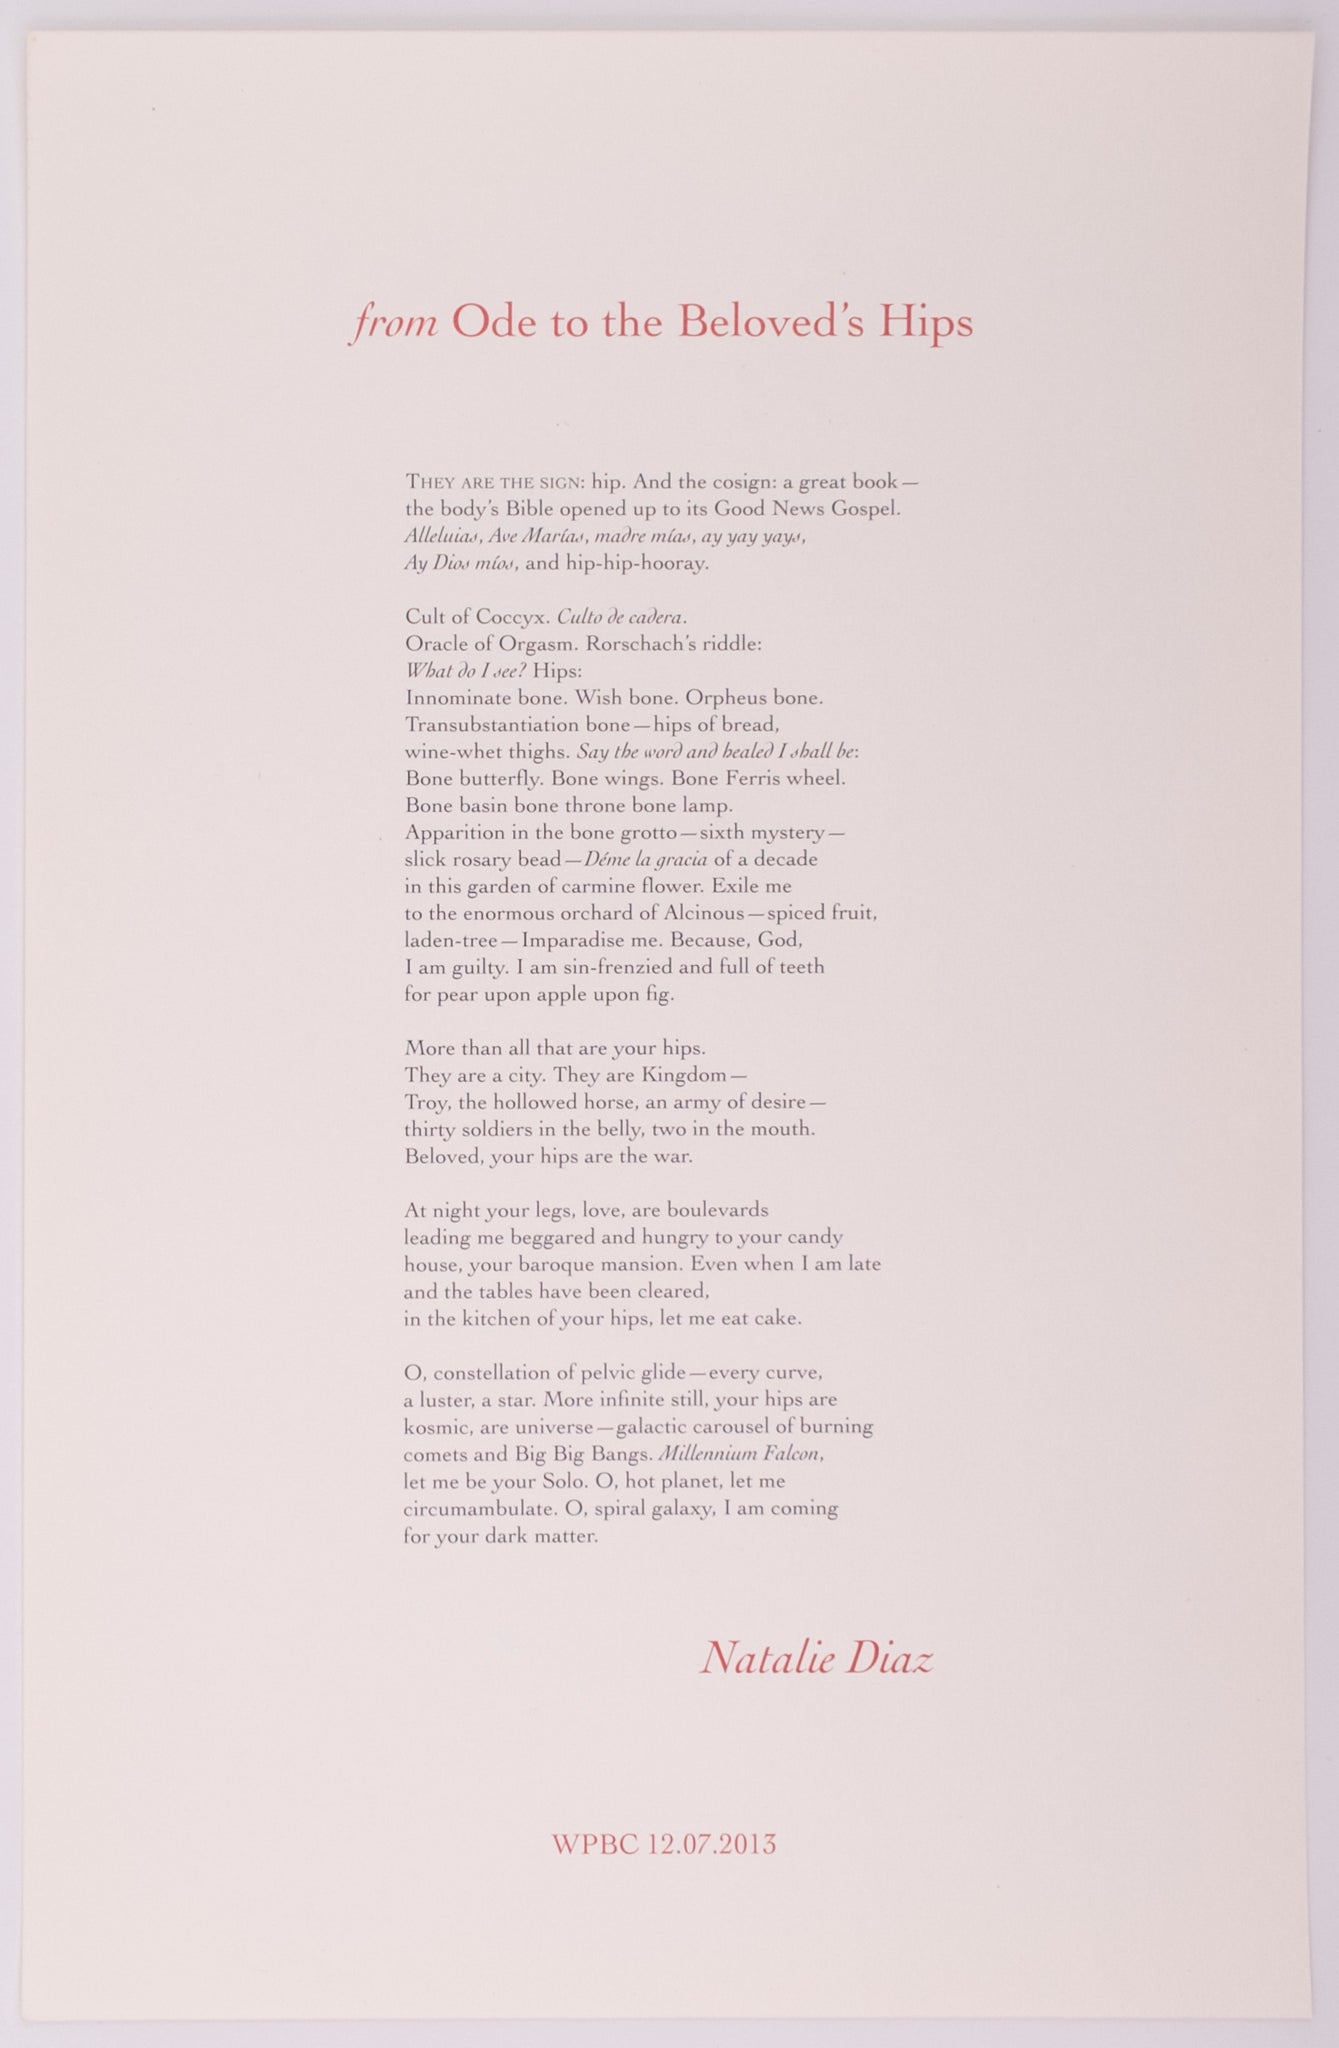 from Ode to the Beloved's Hips by Natalie Diaz (Unsigned)